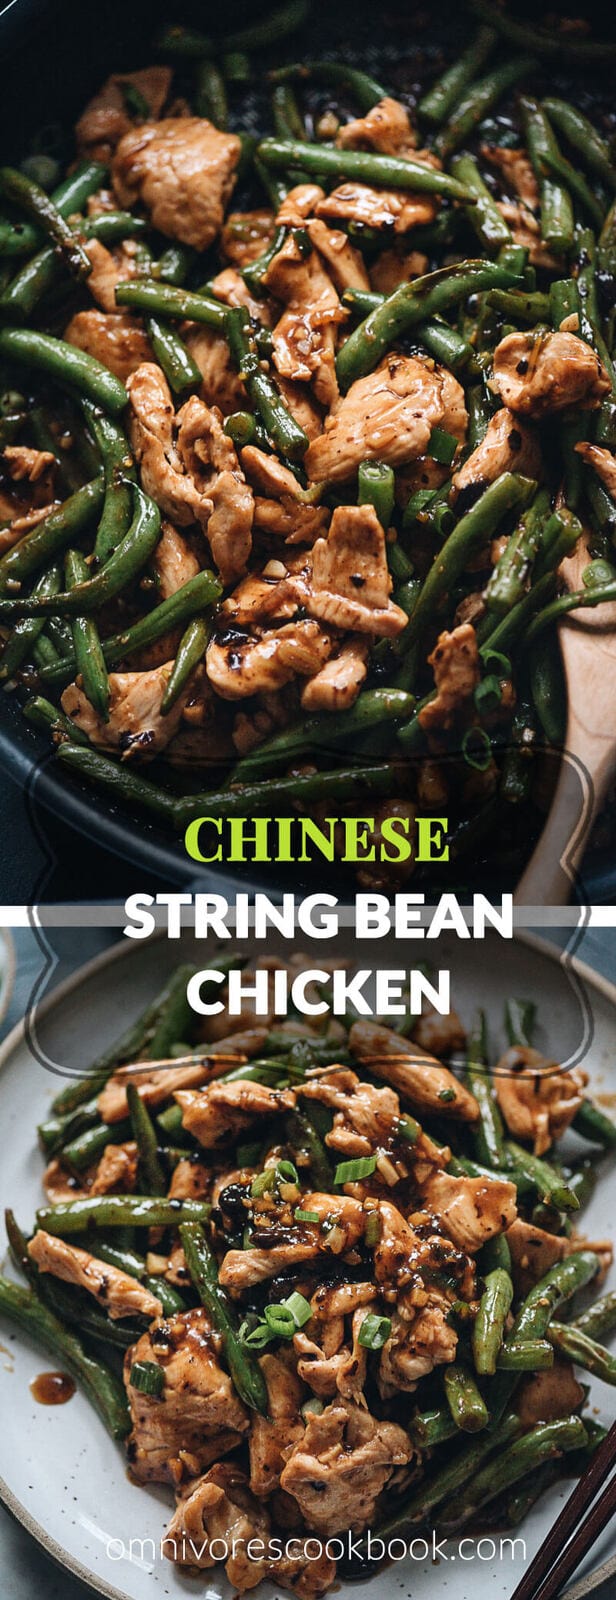 String bean chicken - This takeout string bean chicken is so easy to make and perfect for a weekday dinner. The juicy chicken is seared in a fragrant black bean sauce with tender green beans. The recipe yields extra sauce so you can serve it on rice to make a delicious one-bowl meal. {Gluten-Free adaptable}